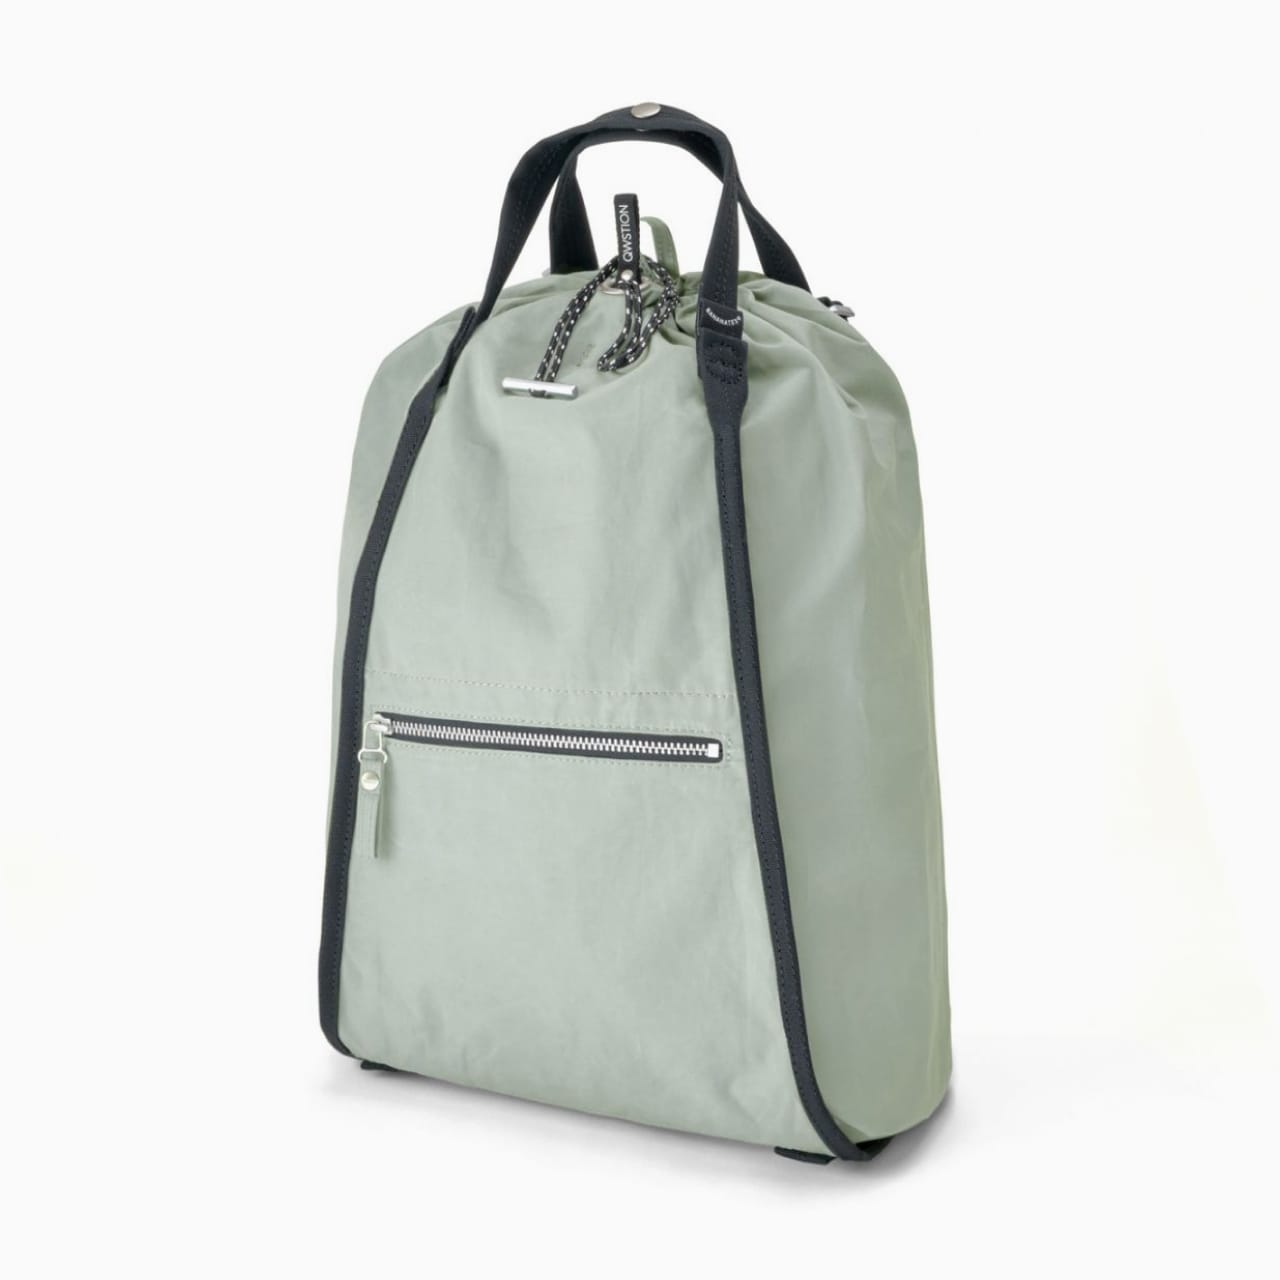 Light green canvas bag with black straps, handle, front zipper pouch, and drawstring top.